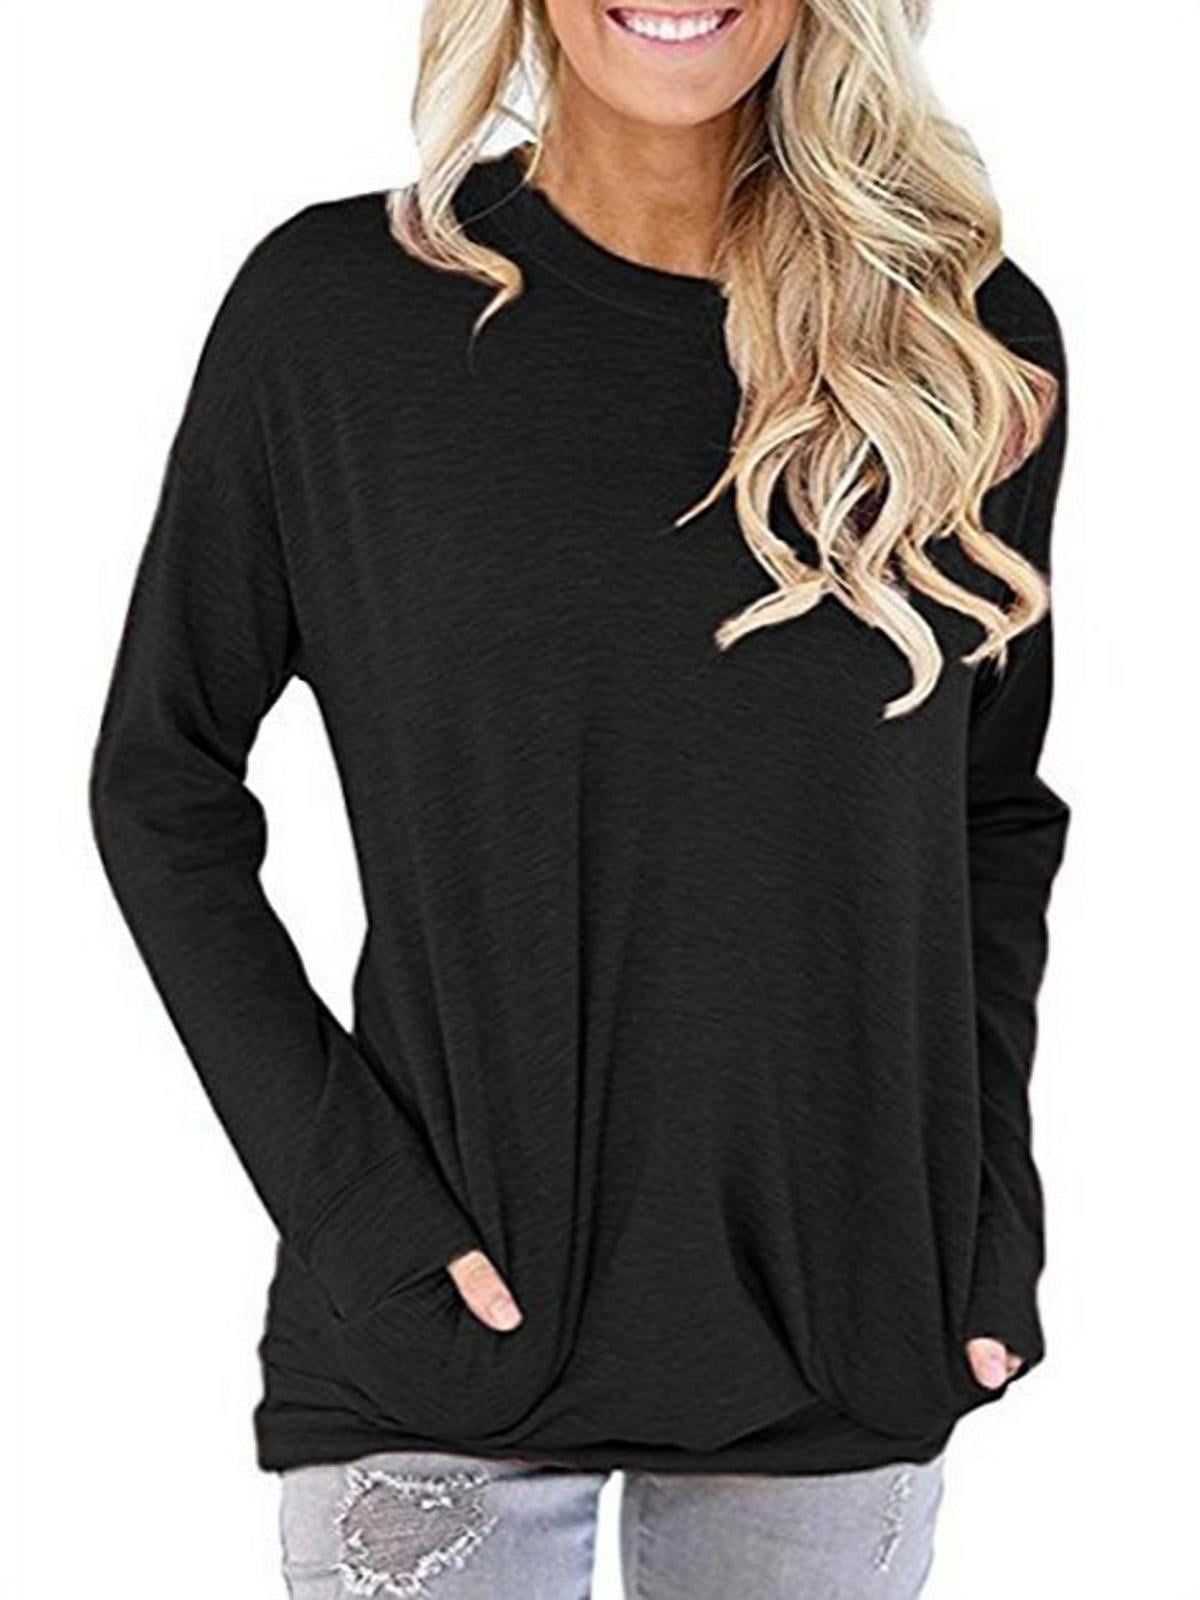 Kuzkauf Womens Long Sleeve Tops Round Neck Color Block Loose Casual Sweatshirts with Pockets 